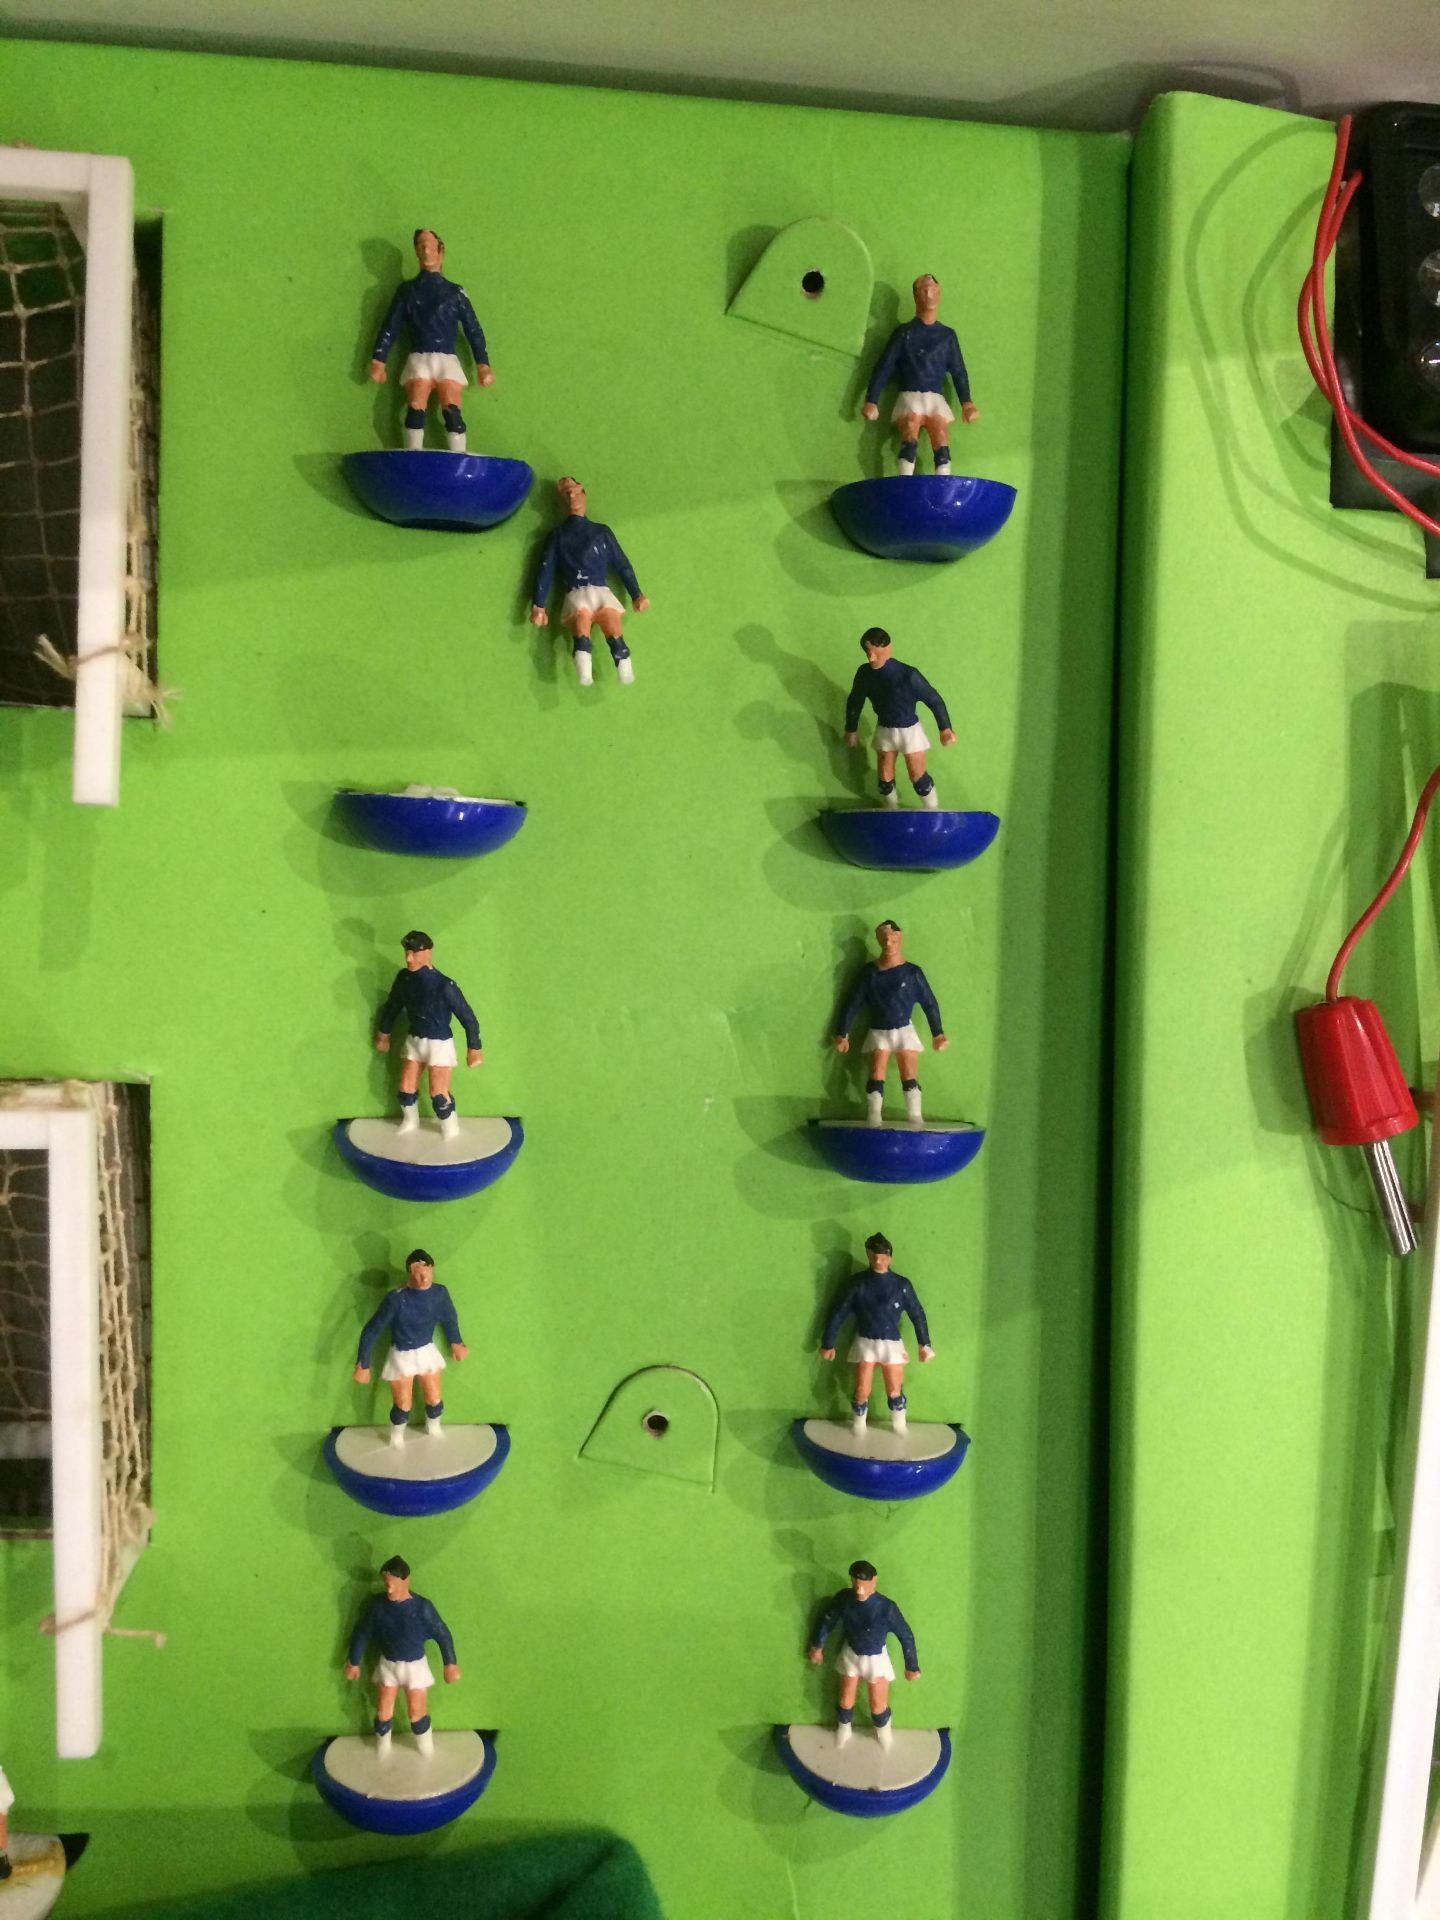 The New Subbuteo table soccer Continental 'Floodlighting' Edition boxed it includes a full set of - Image 5 of 6